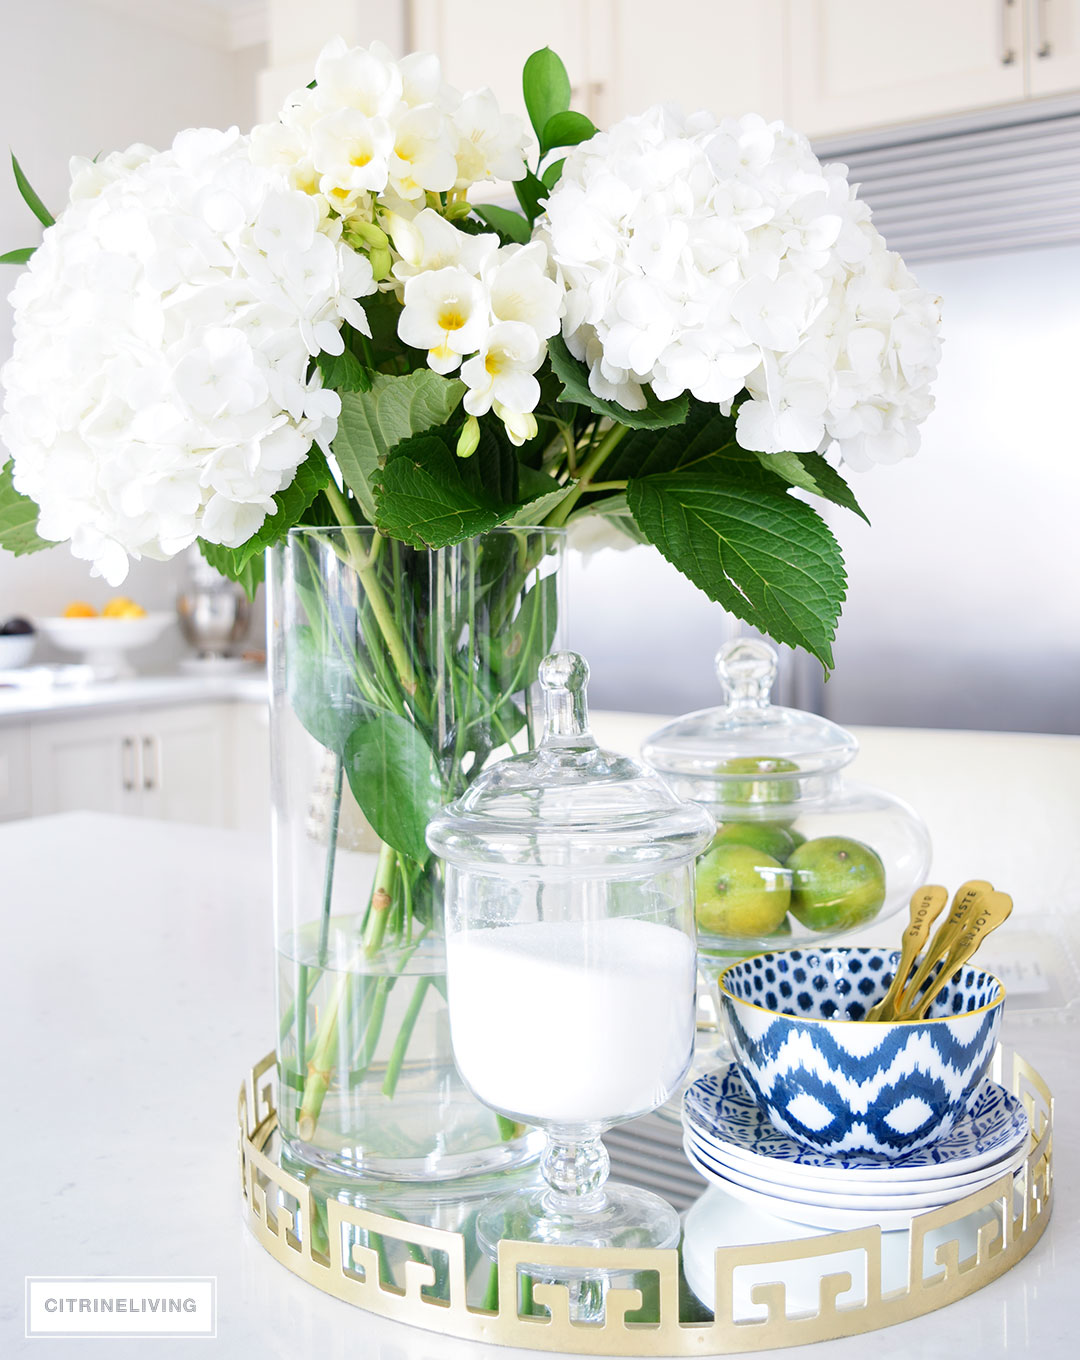 Beautiful hydrangeas and freesias paired with blue and white ikat bowls and dishes create a beautiful kitchen table centerpiece.